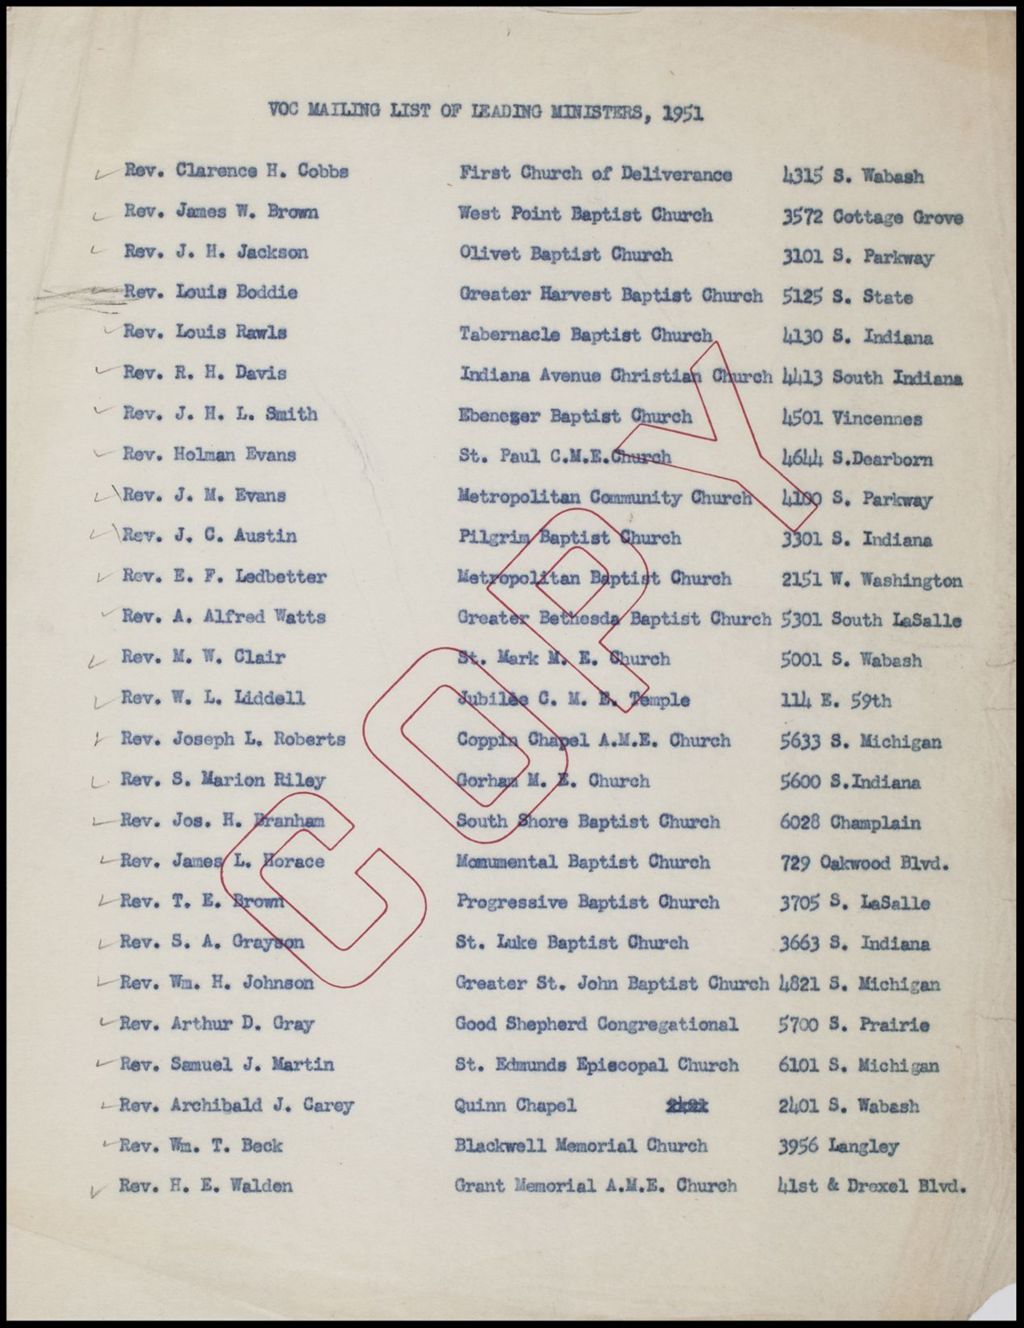 Ministers and Churches - Lists, 1951 (Folder II-2318)